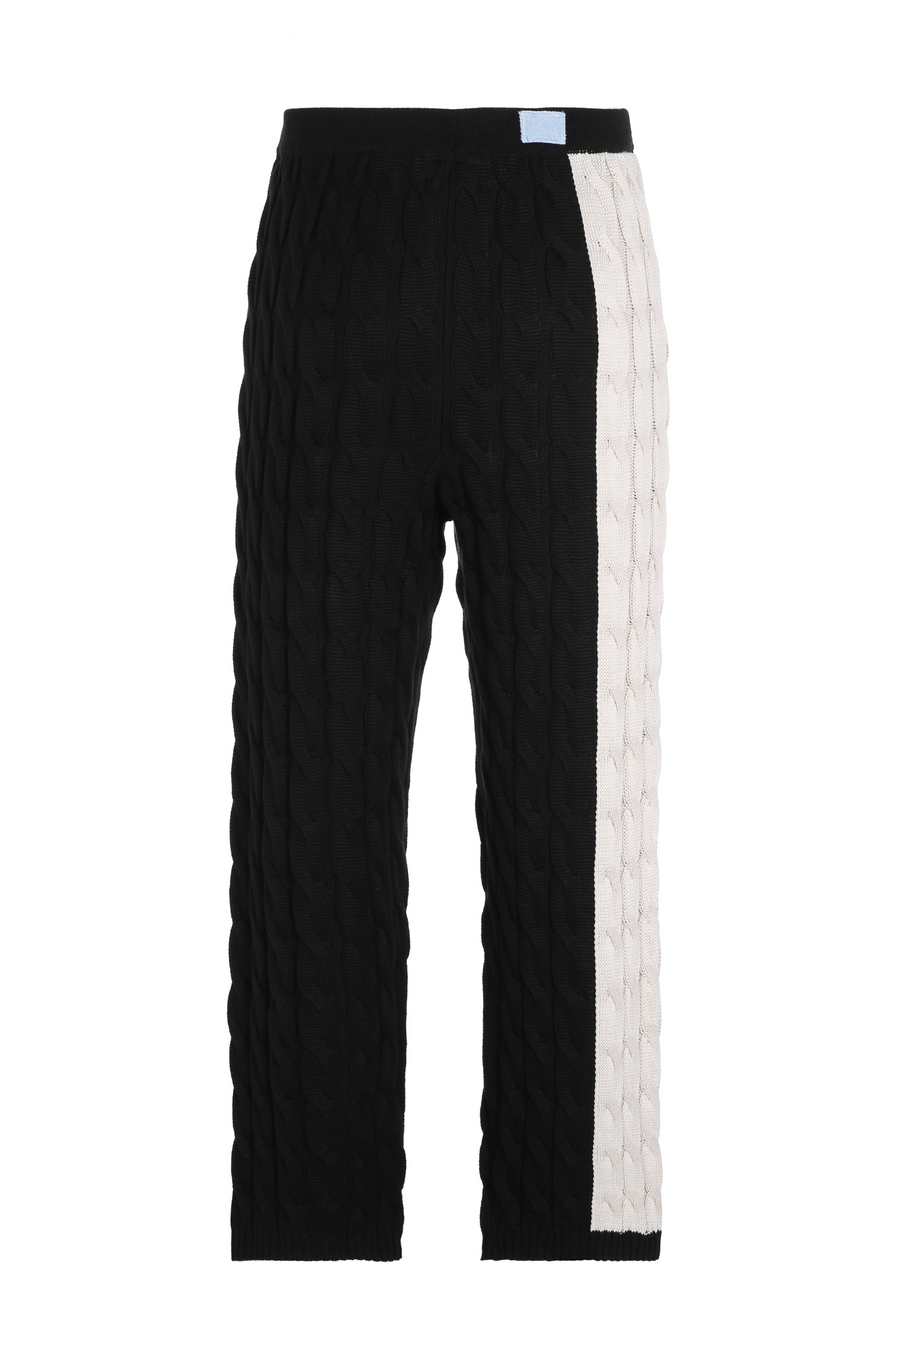 The Two-Toned Cable Knit Pants